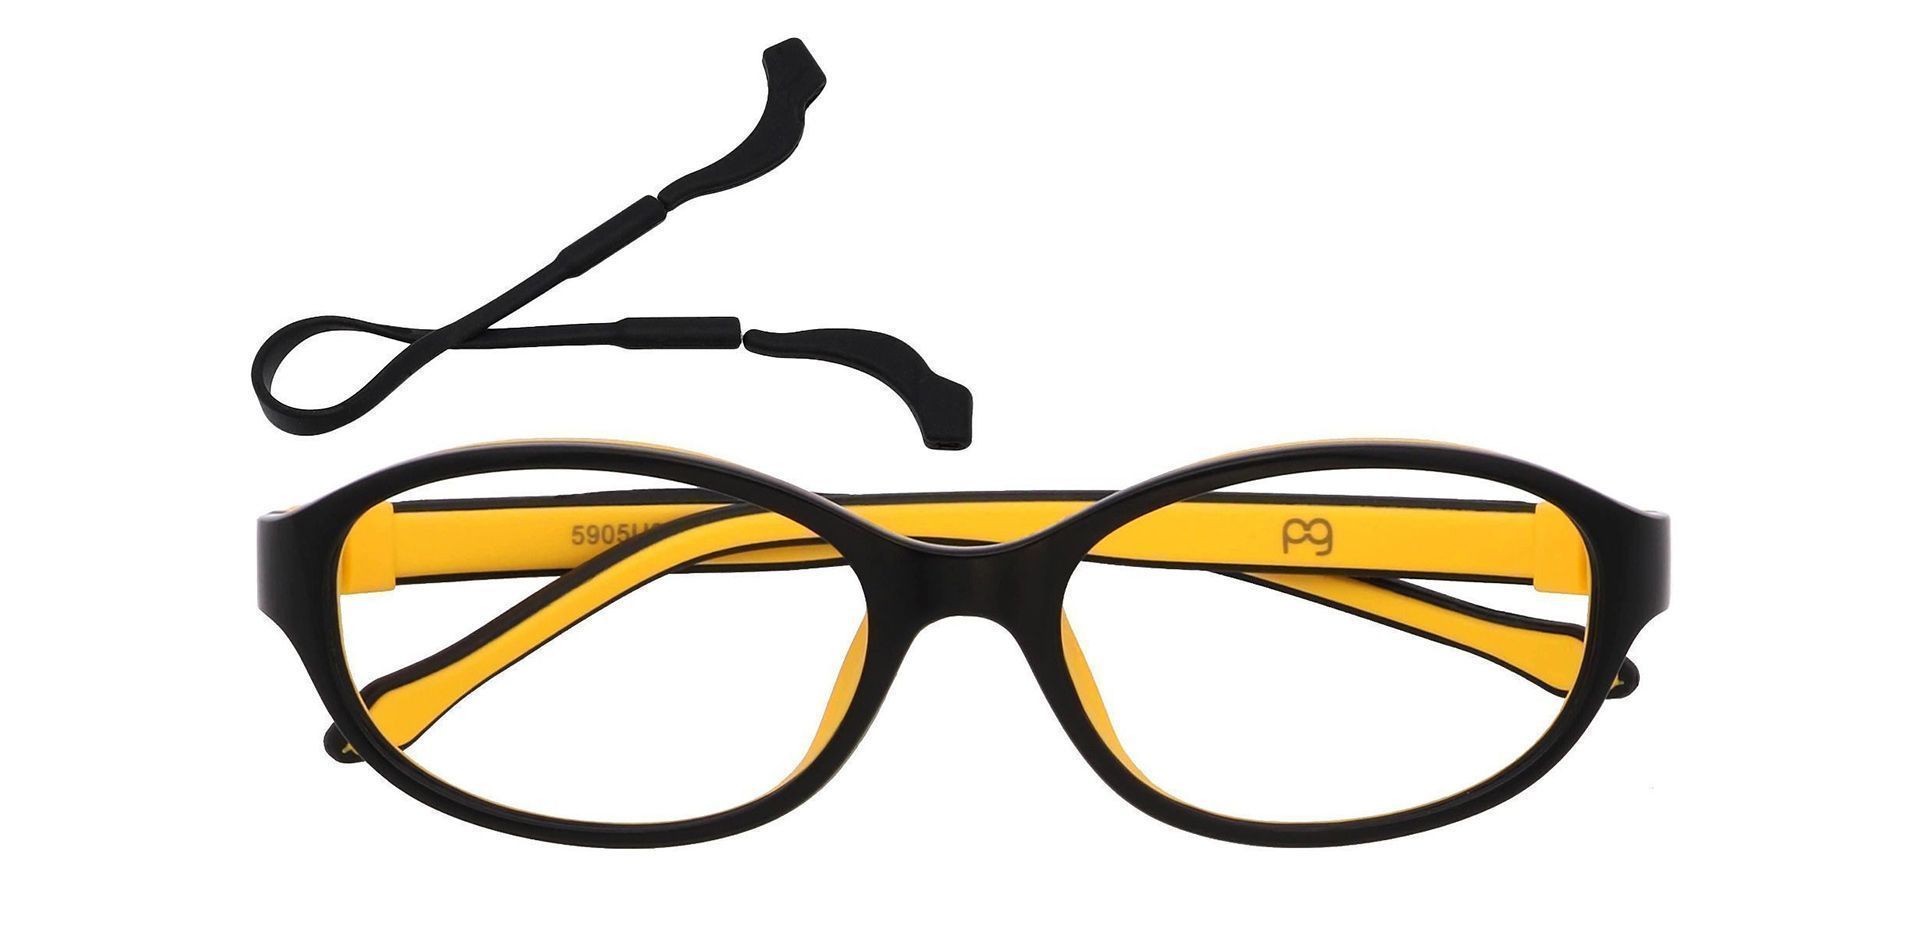 Stone Oval Prescription Glasses - The Frame Is Black And Yellow